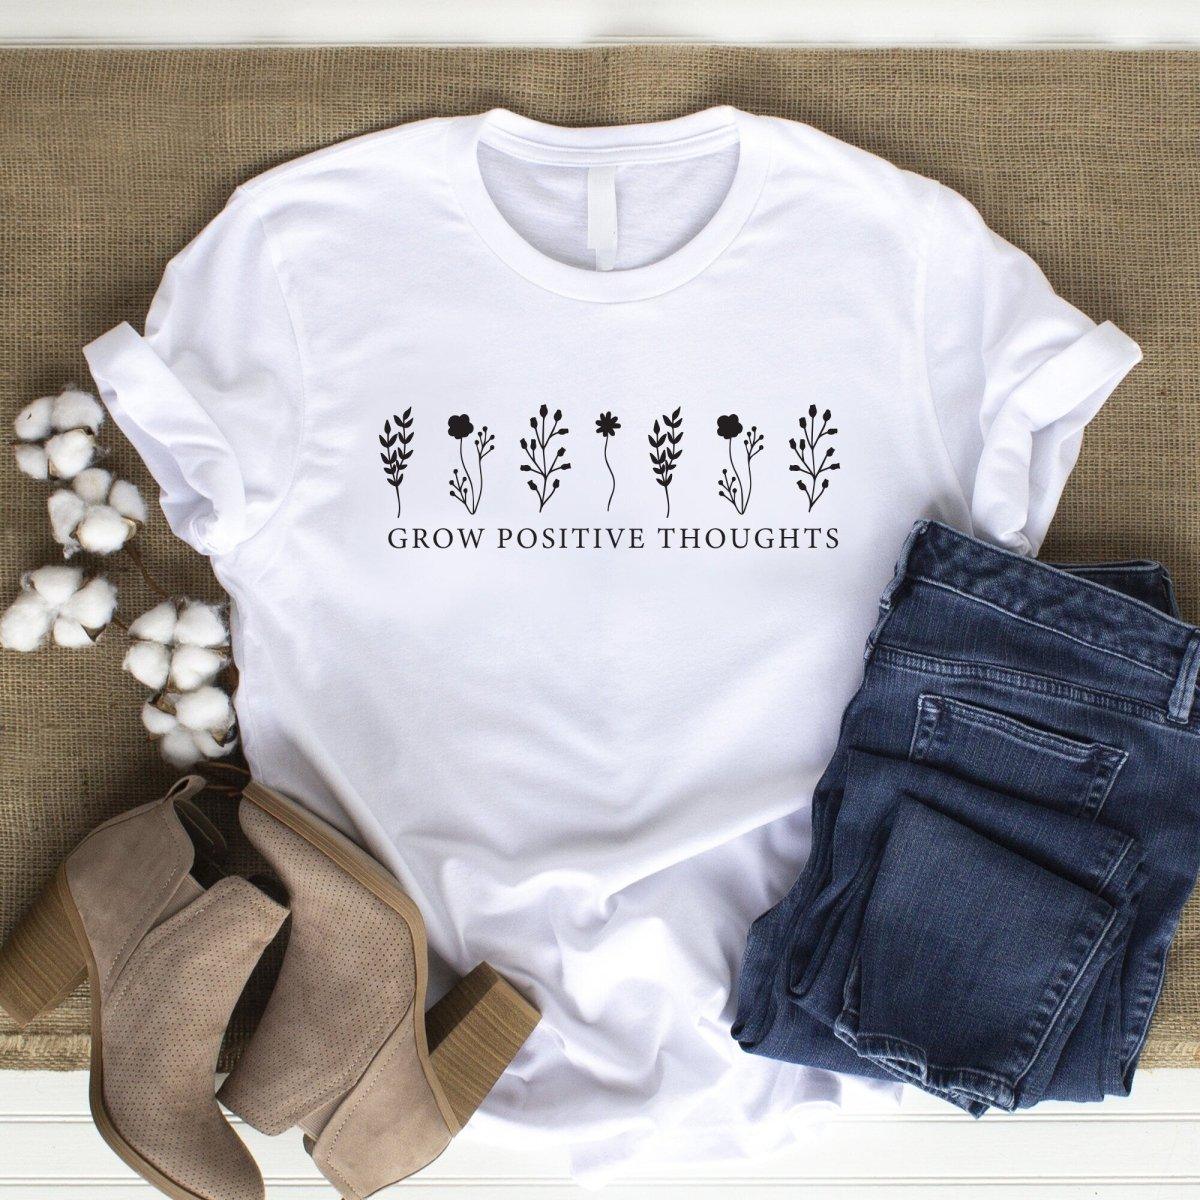 Grow Happy Thoughts T-shirt, Cute T-shirt, Nature T-shirt, Positive Quote T-shirt, Women&#39;s Slogan Tops, Vegan Tops, UK Tops, Mother Earth - Amy Lucy